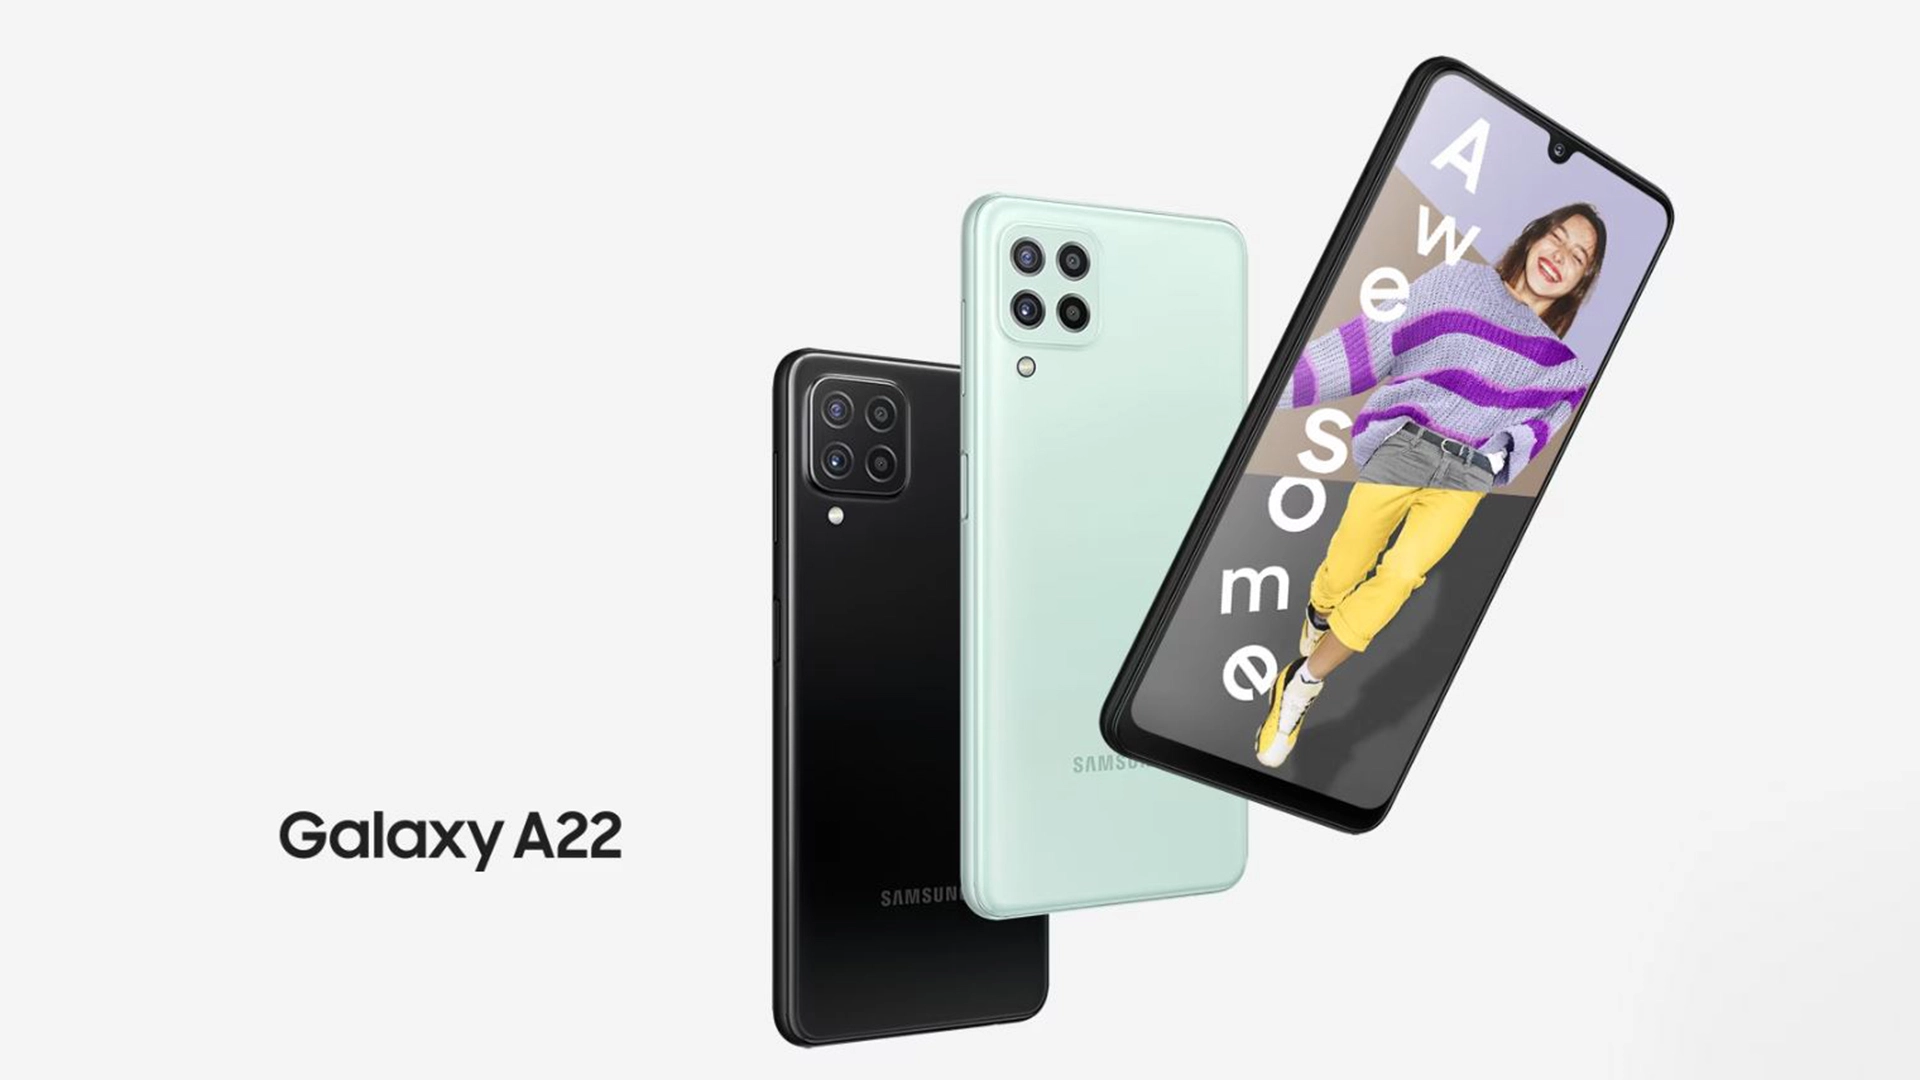 Samsung Galaxy A22: A Phone That’s Stylish And Functional